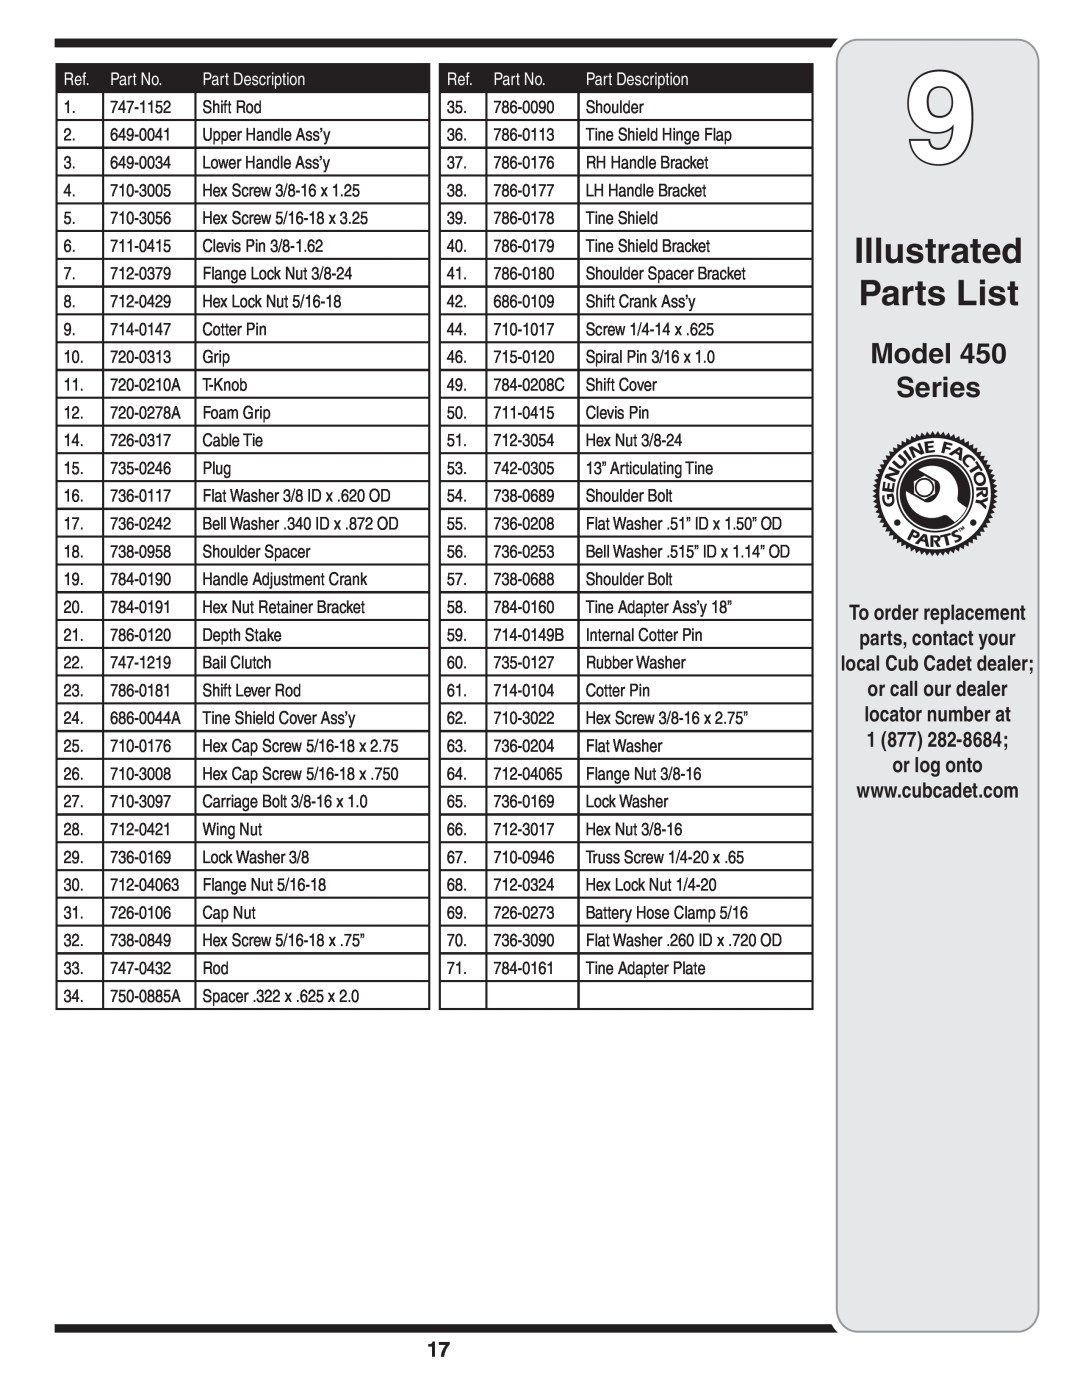 Cub Cadet 450 Illustrated Parts List, Model Series, To order replacement parts, contact your local Cub Cadet dealer 